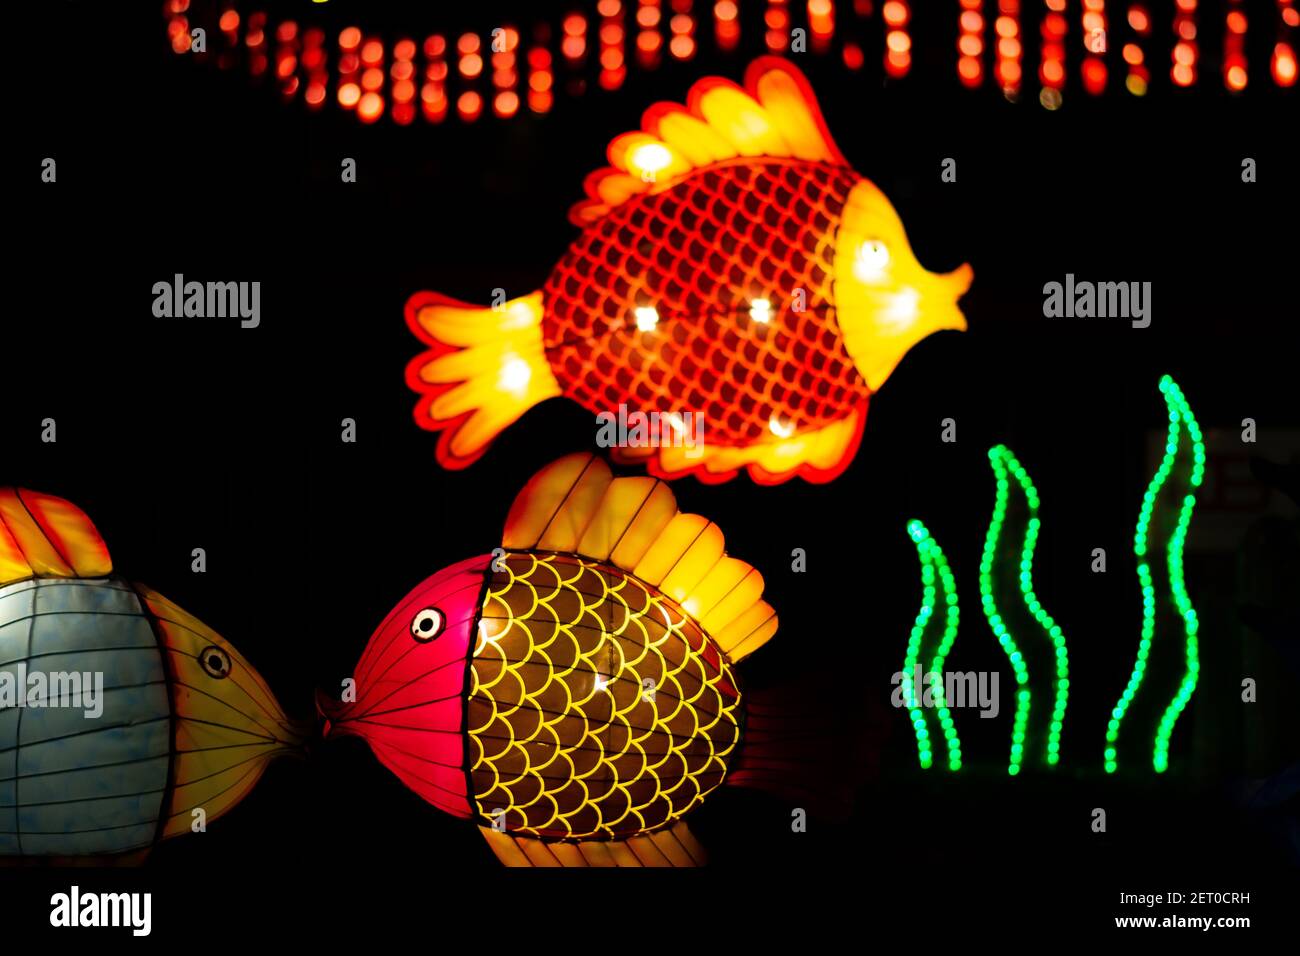 The Chinese Lantern Festival. Two fish lanterns positioned as if kissing each other, with one fish and a seaweed blurred in a background. Stock Photo